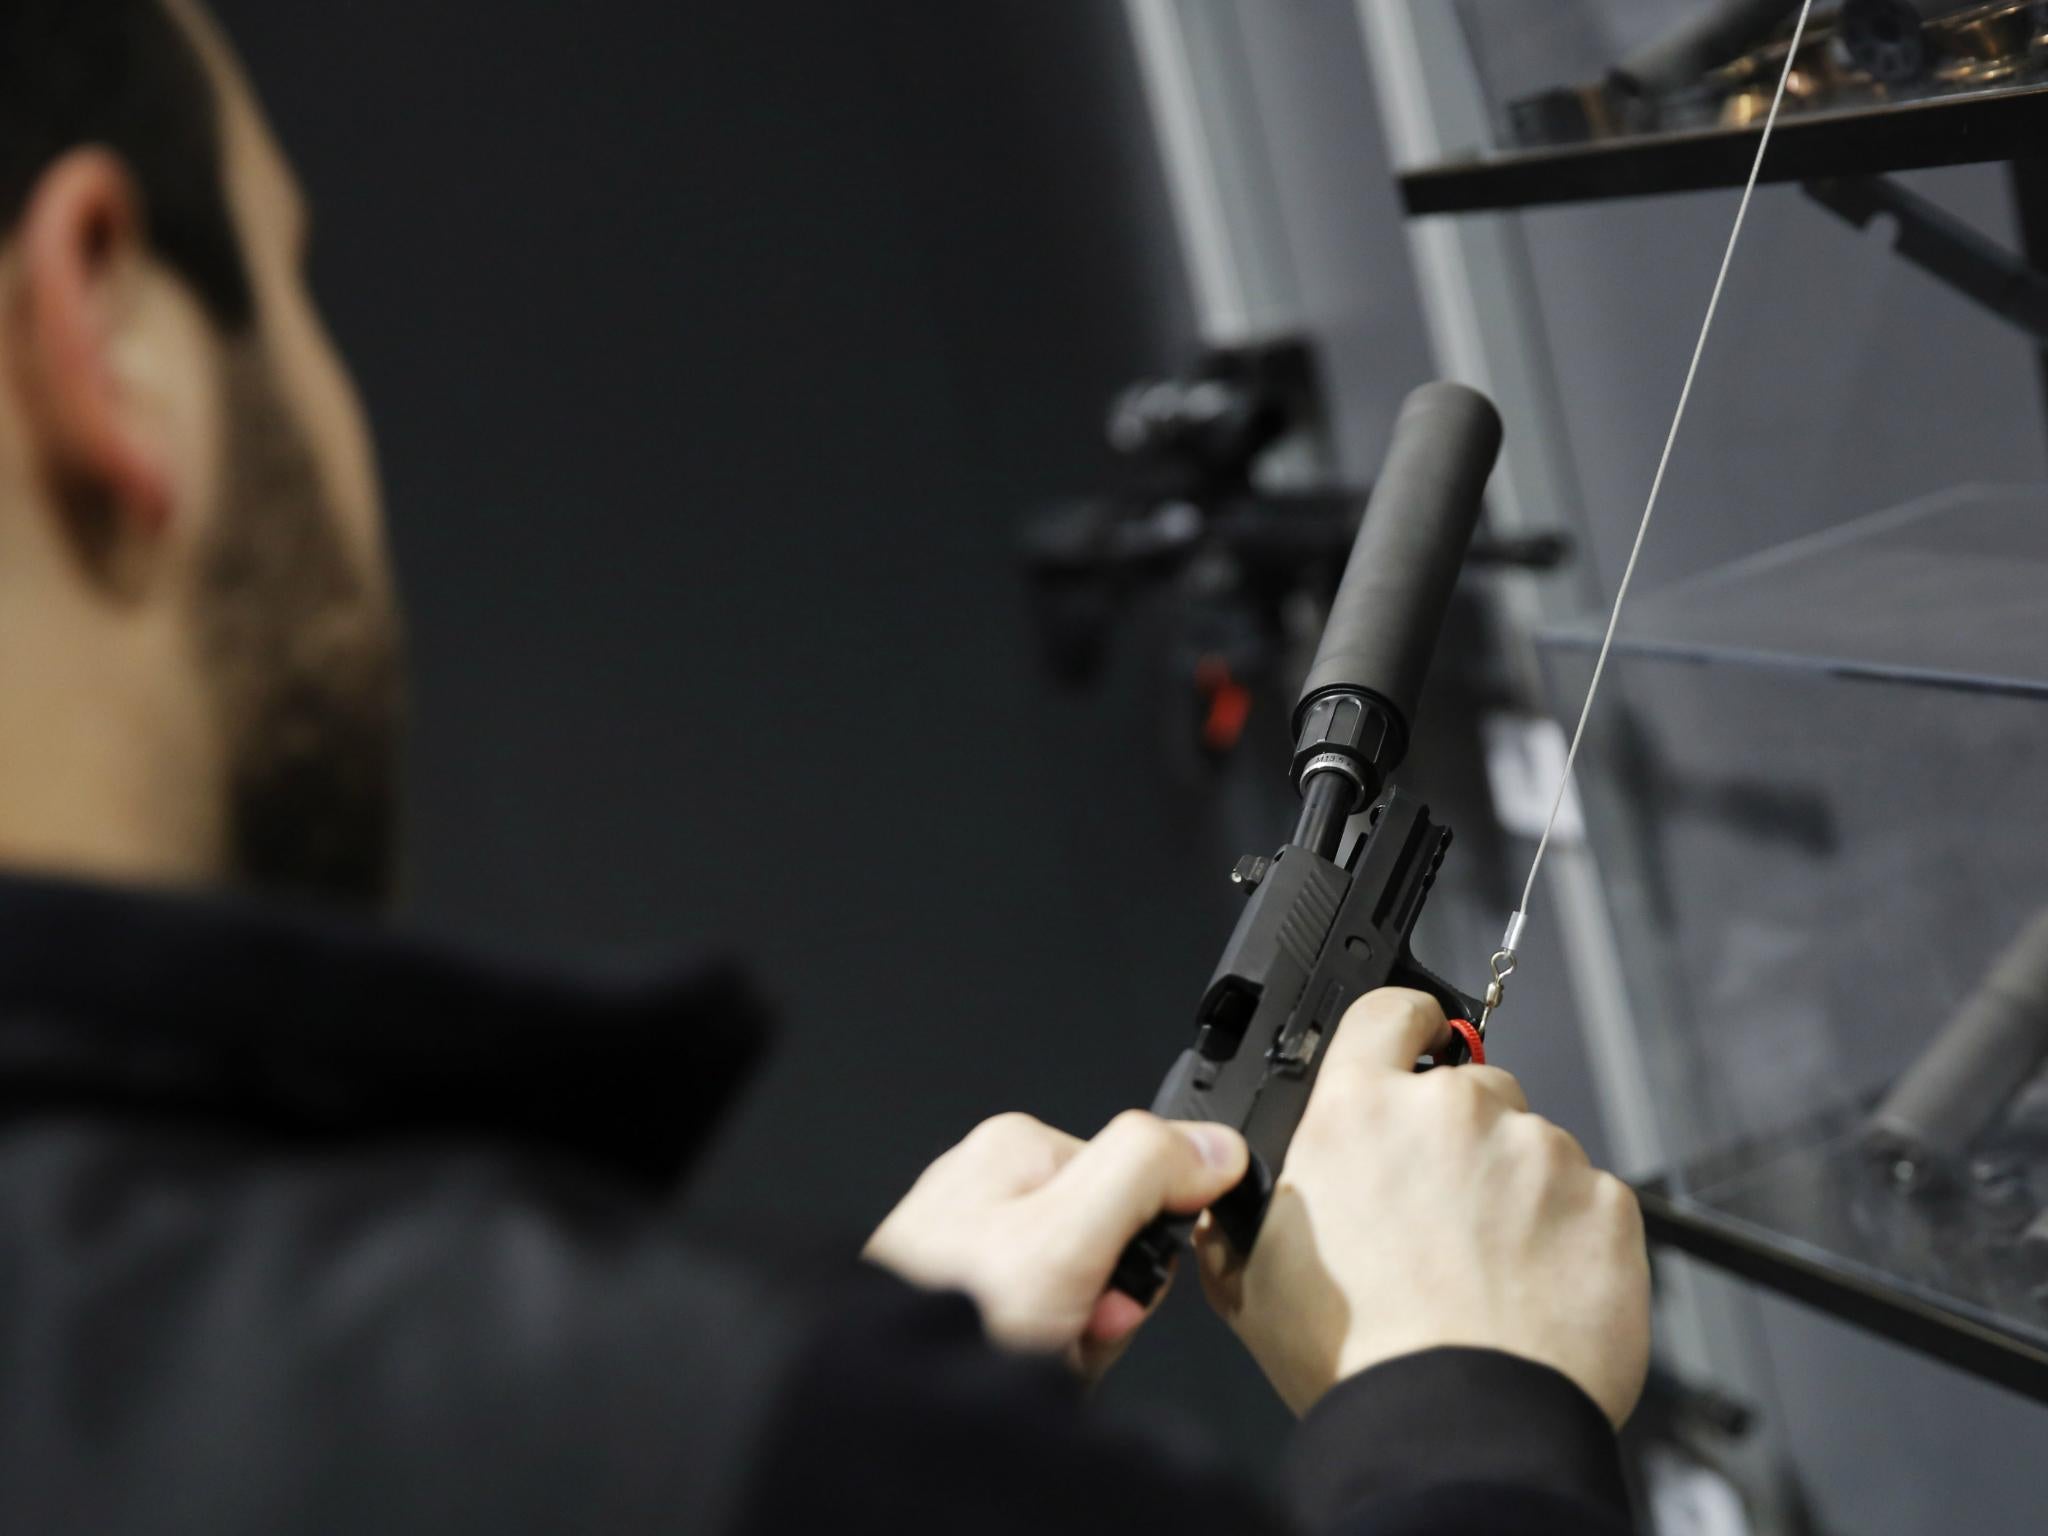 A visitors pulls the slide of a pistol with a silencer at a gun displays at a National Rifle Association outdoor sports trade show on 10 February 2017 in Harrisburg, Pennsylvania